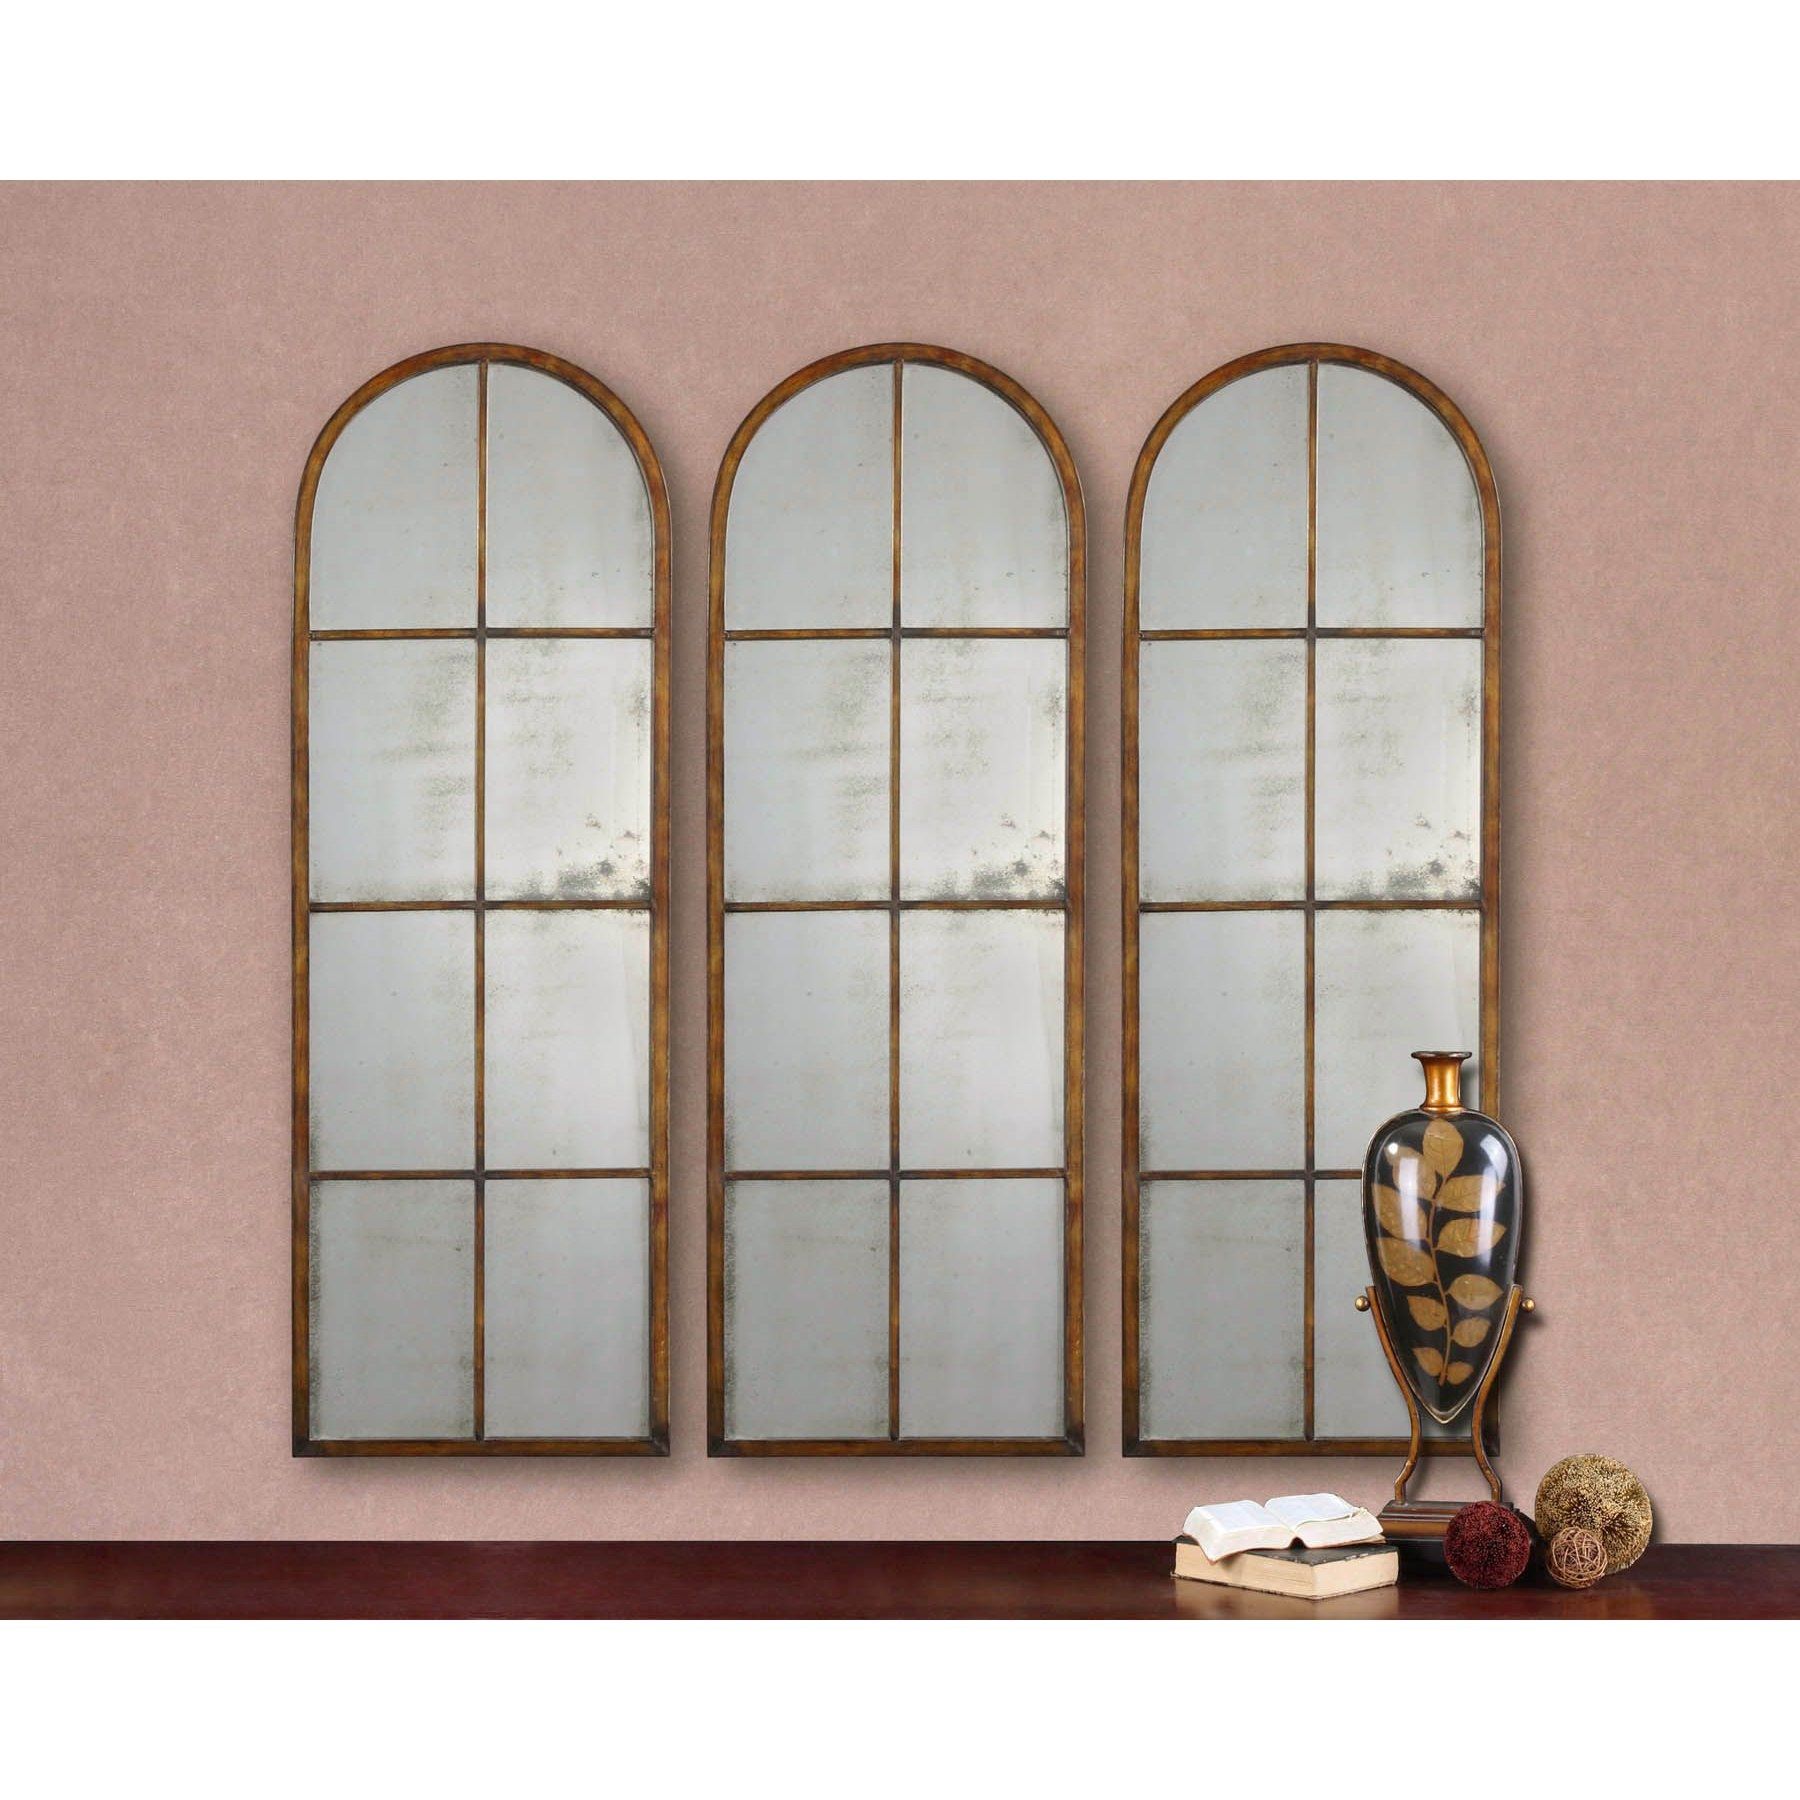 Larissa Arched Oversized Wall Mirror Reviews Joss Main Throughout Arched Wall Mirrors (View 13 of 15)